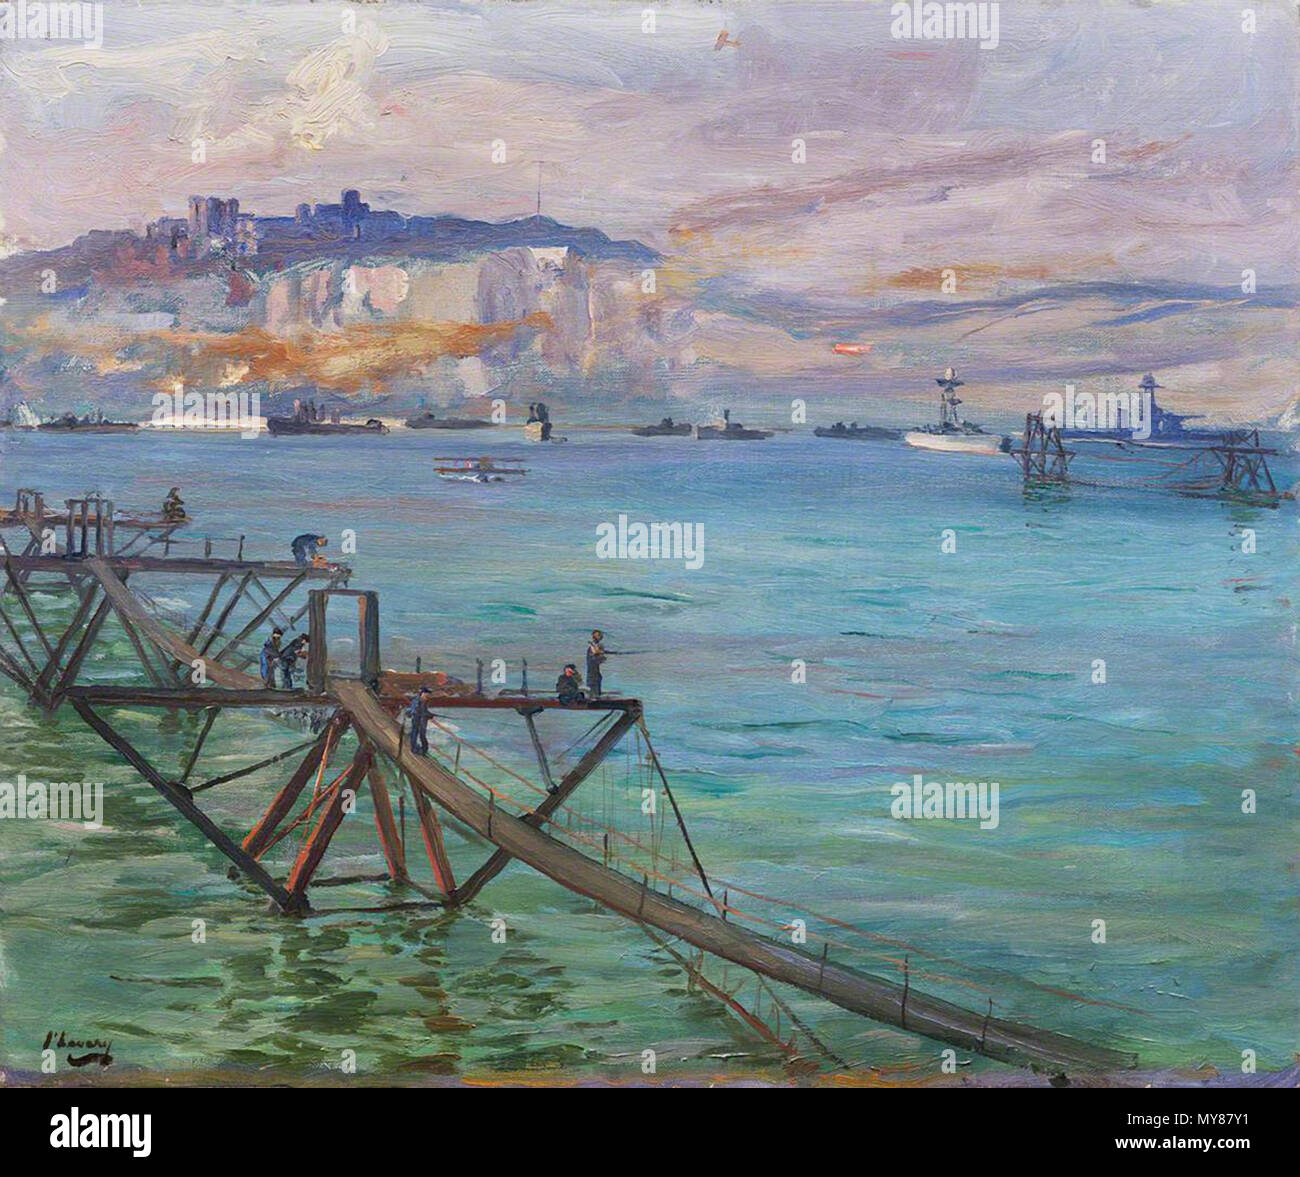 . Джон Лавери (англ. John Lavery) (1856—1941) — ирландский художник, мастер портретной и пейзажной живописи. ================== Sir John Lavery RA (20 March 1856 – 10 January 1941) was an Irish painter best known for his portraits and wartime depictions. www.youtube.com/watch?v=yRaCb7czsQI . 2 March 2016, 05:44. Leonid Ll 519 The Entrance, Dover Harbour, 1918- In the Foreground Are the Harbour Protection Nets against Enemy Submarines (37687820525) Stock Photo